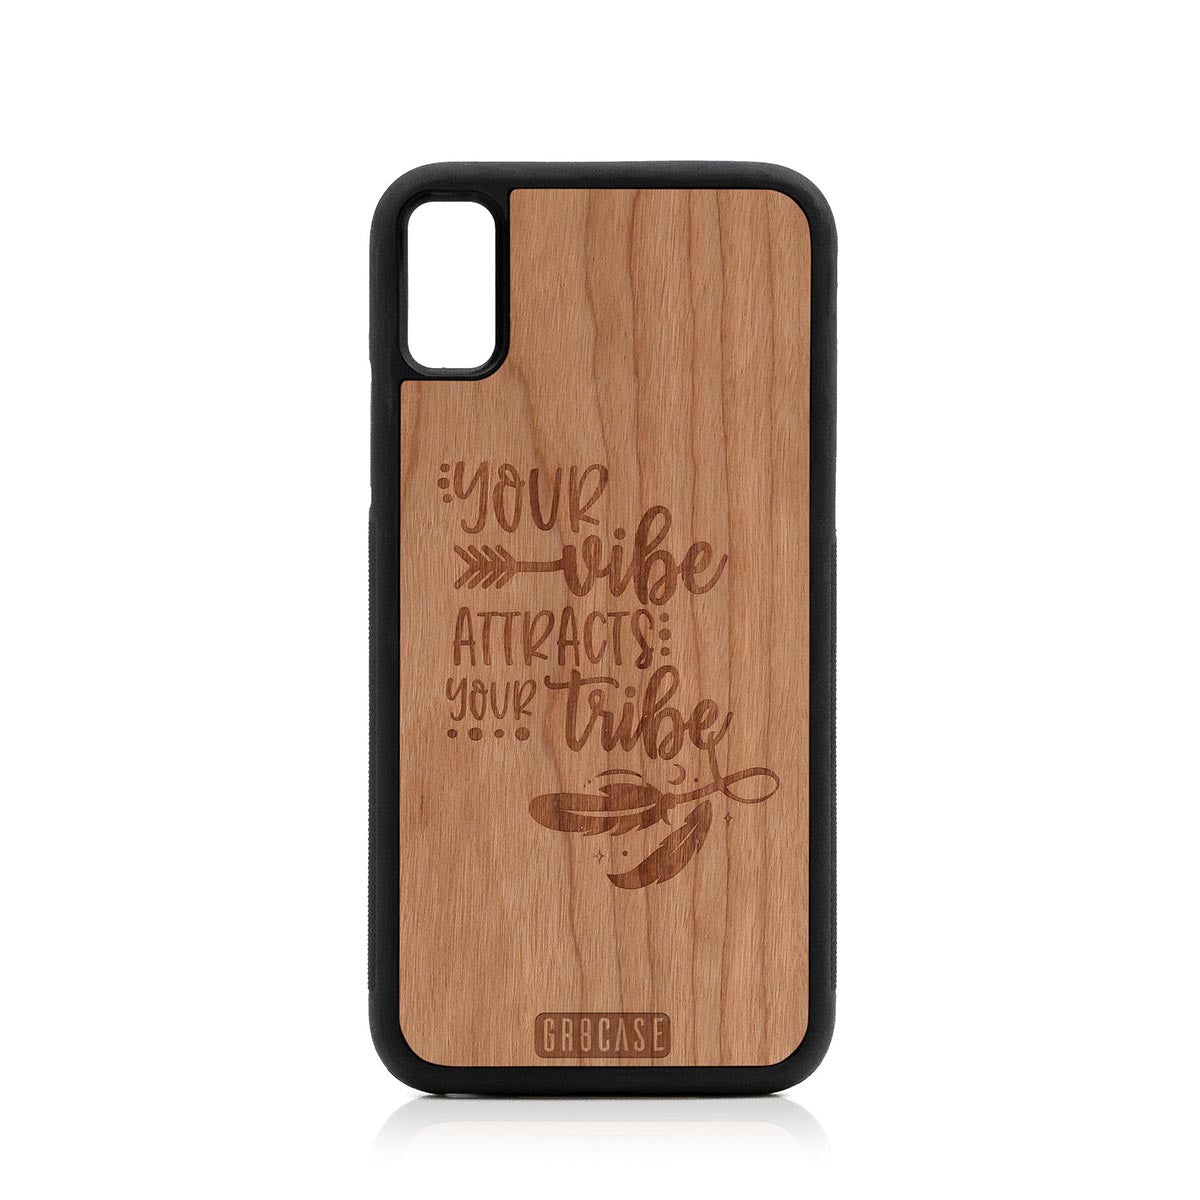 Your Vibe Attracts Your Tribe Design Wood Case For iPhone X/XS